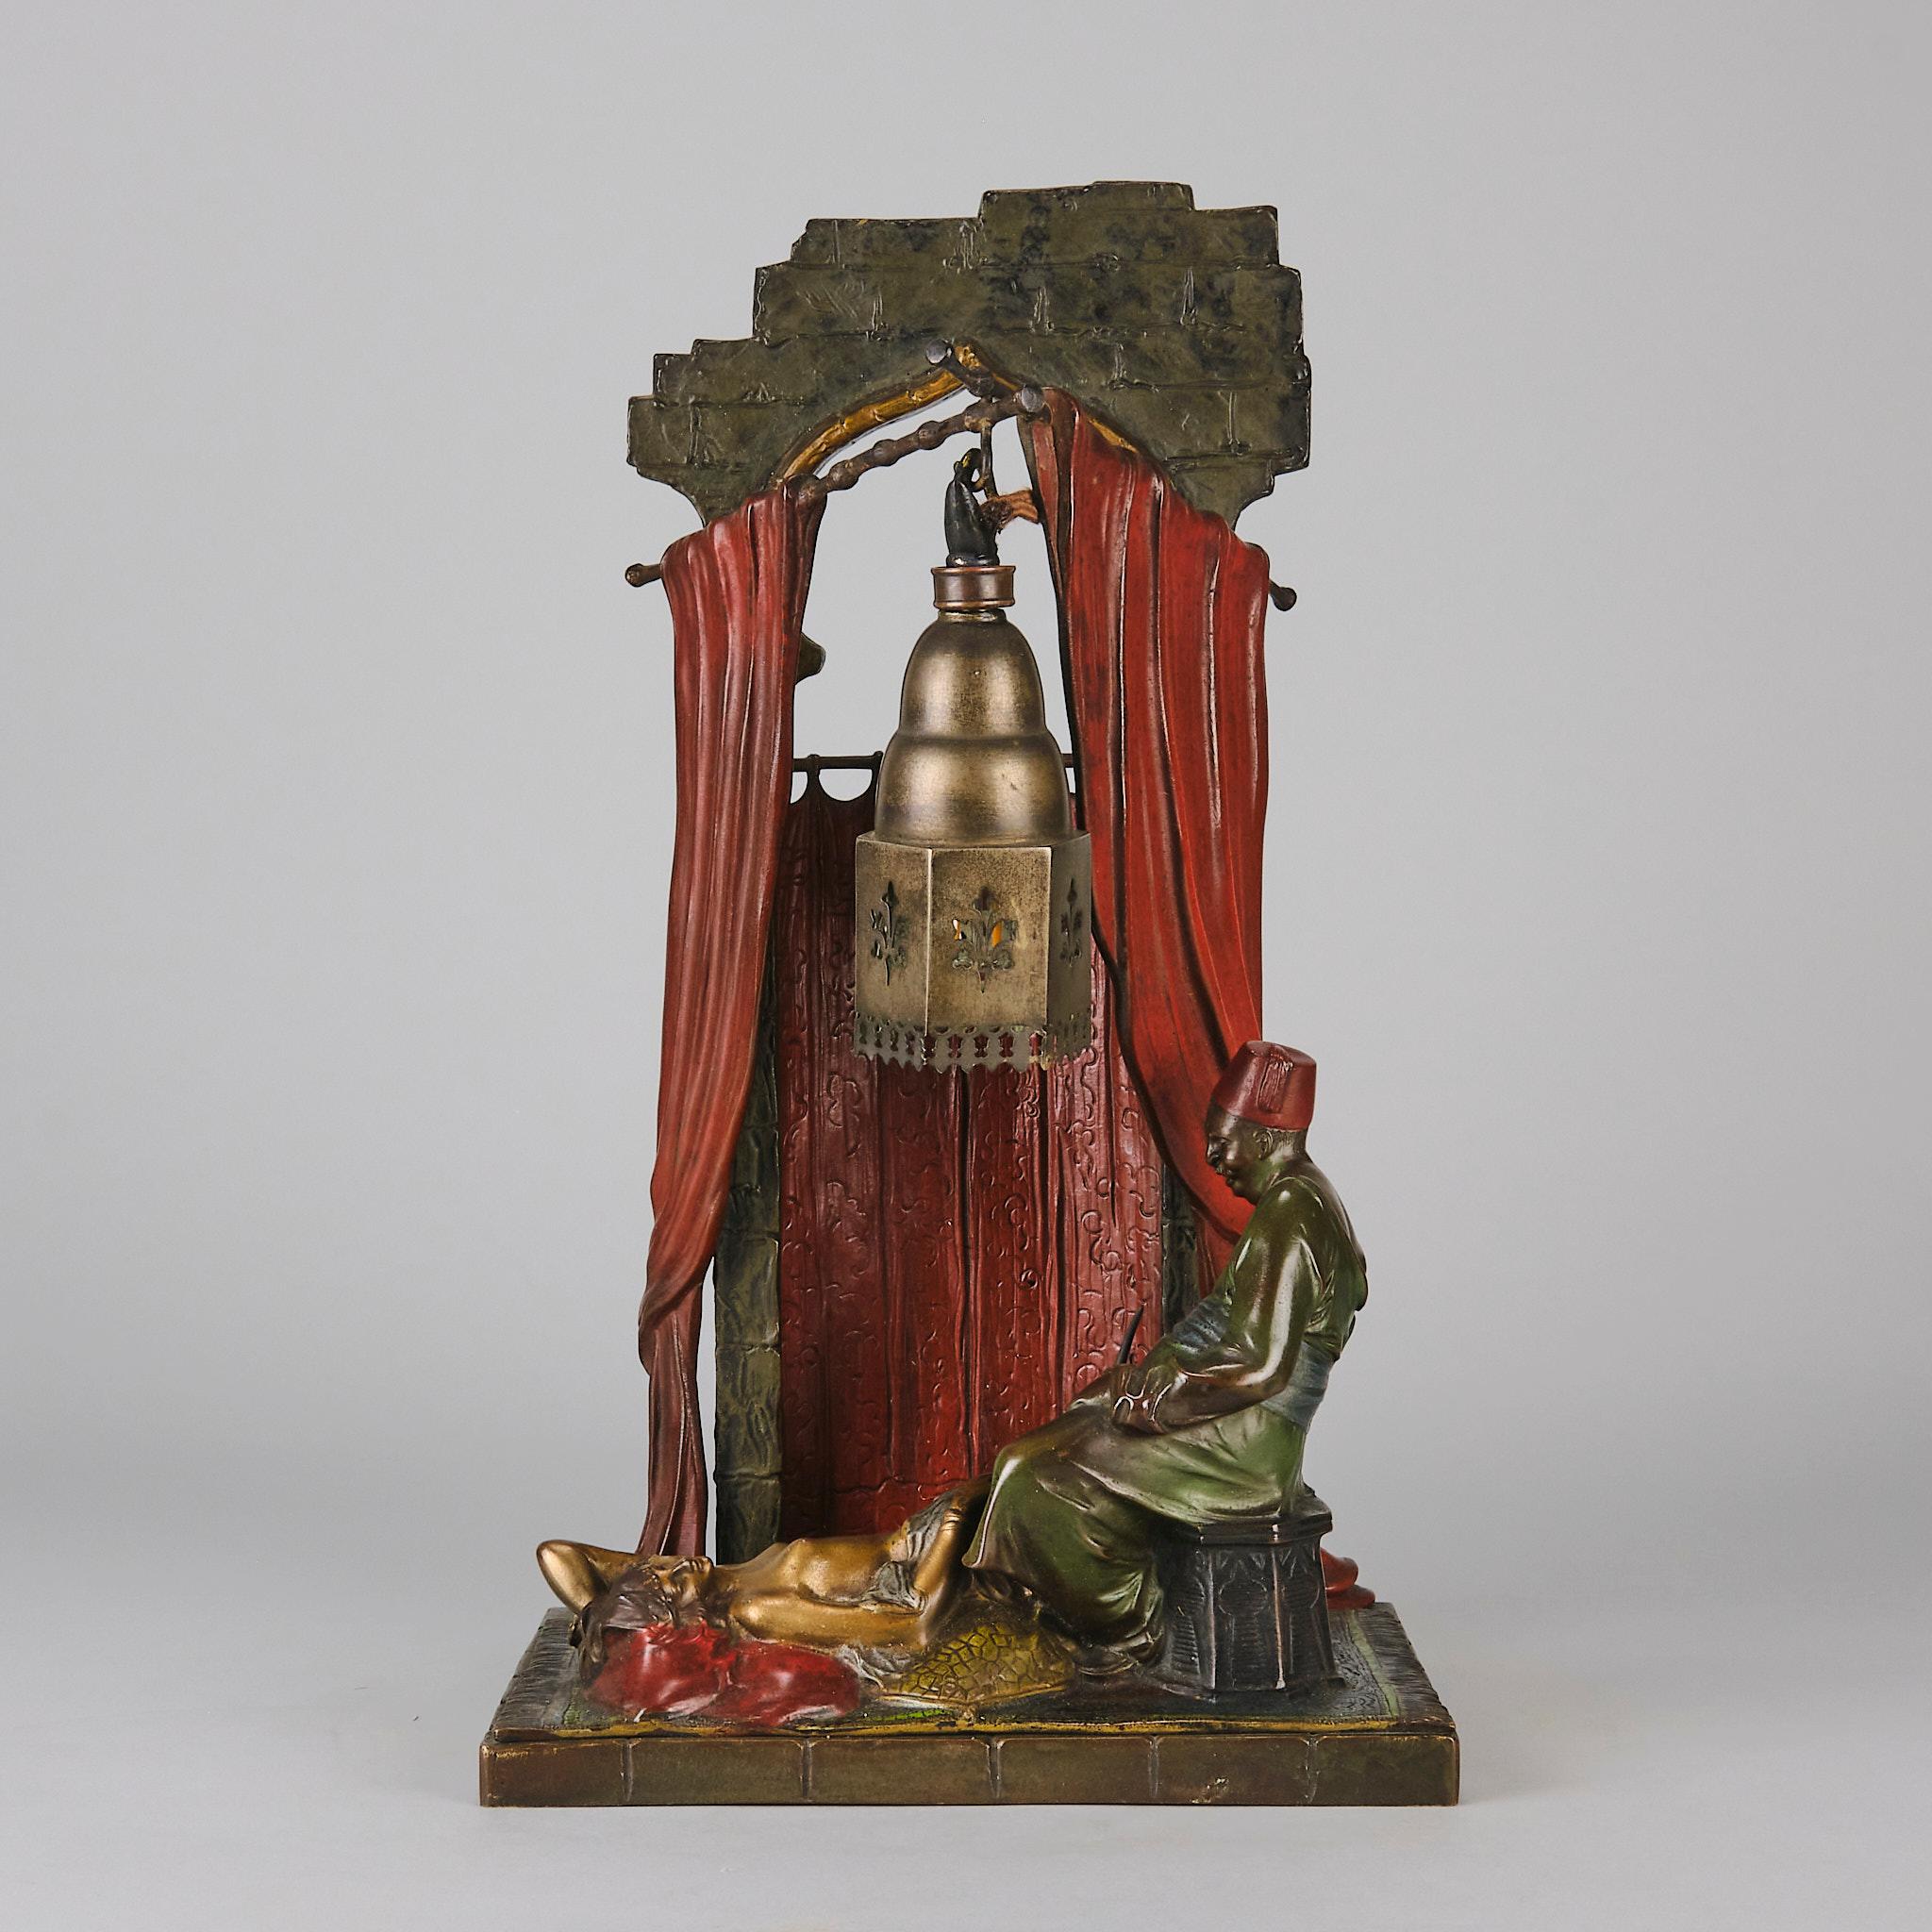 An erotically charged early 20th century Art Deco cold painted bronze lamp modelled with a harem beauty relaxing on a rug in front of an Arab man with an architectural background with suspended lantern containing a light. The whole raised on a